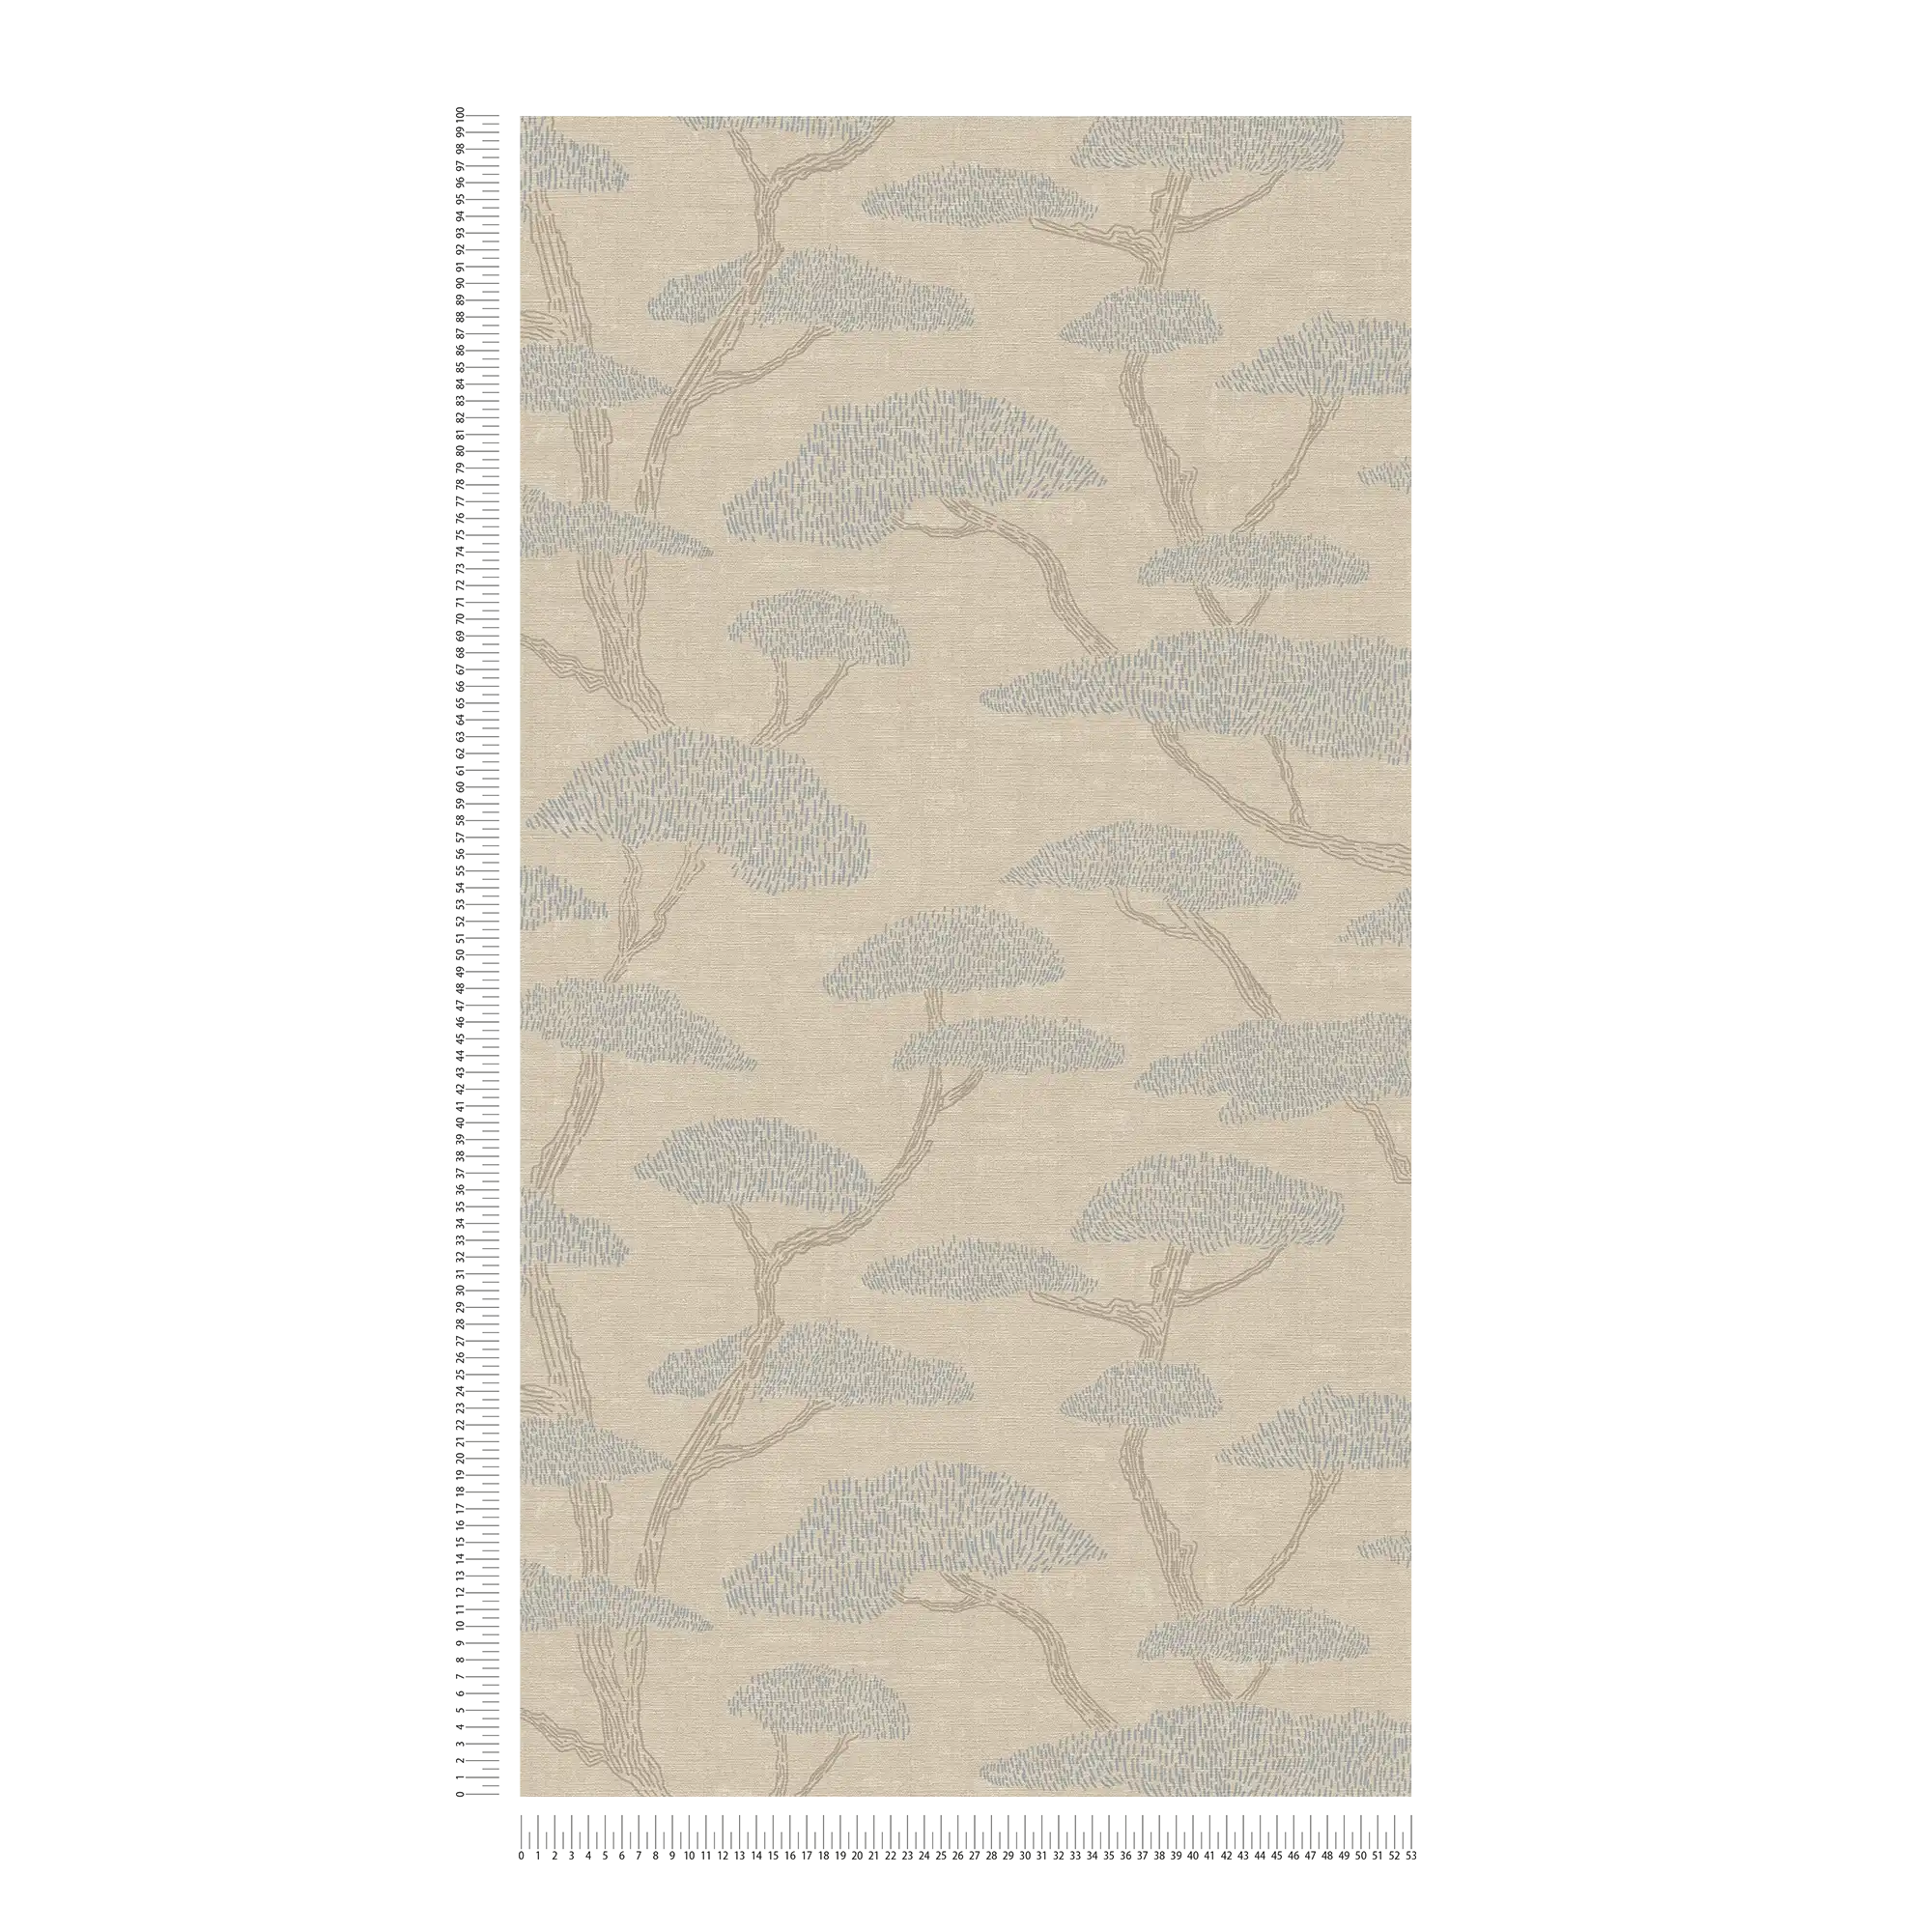             Beige wallpaper with abstract pine tree pattern
        